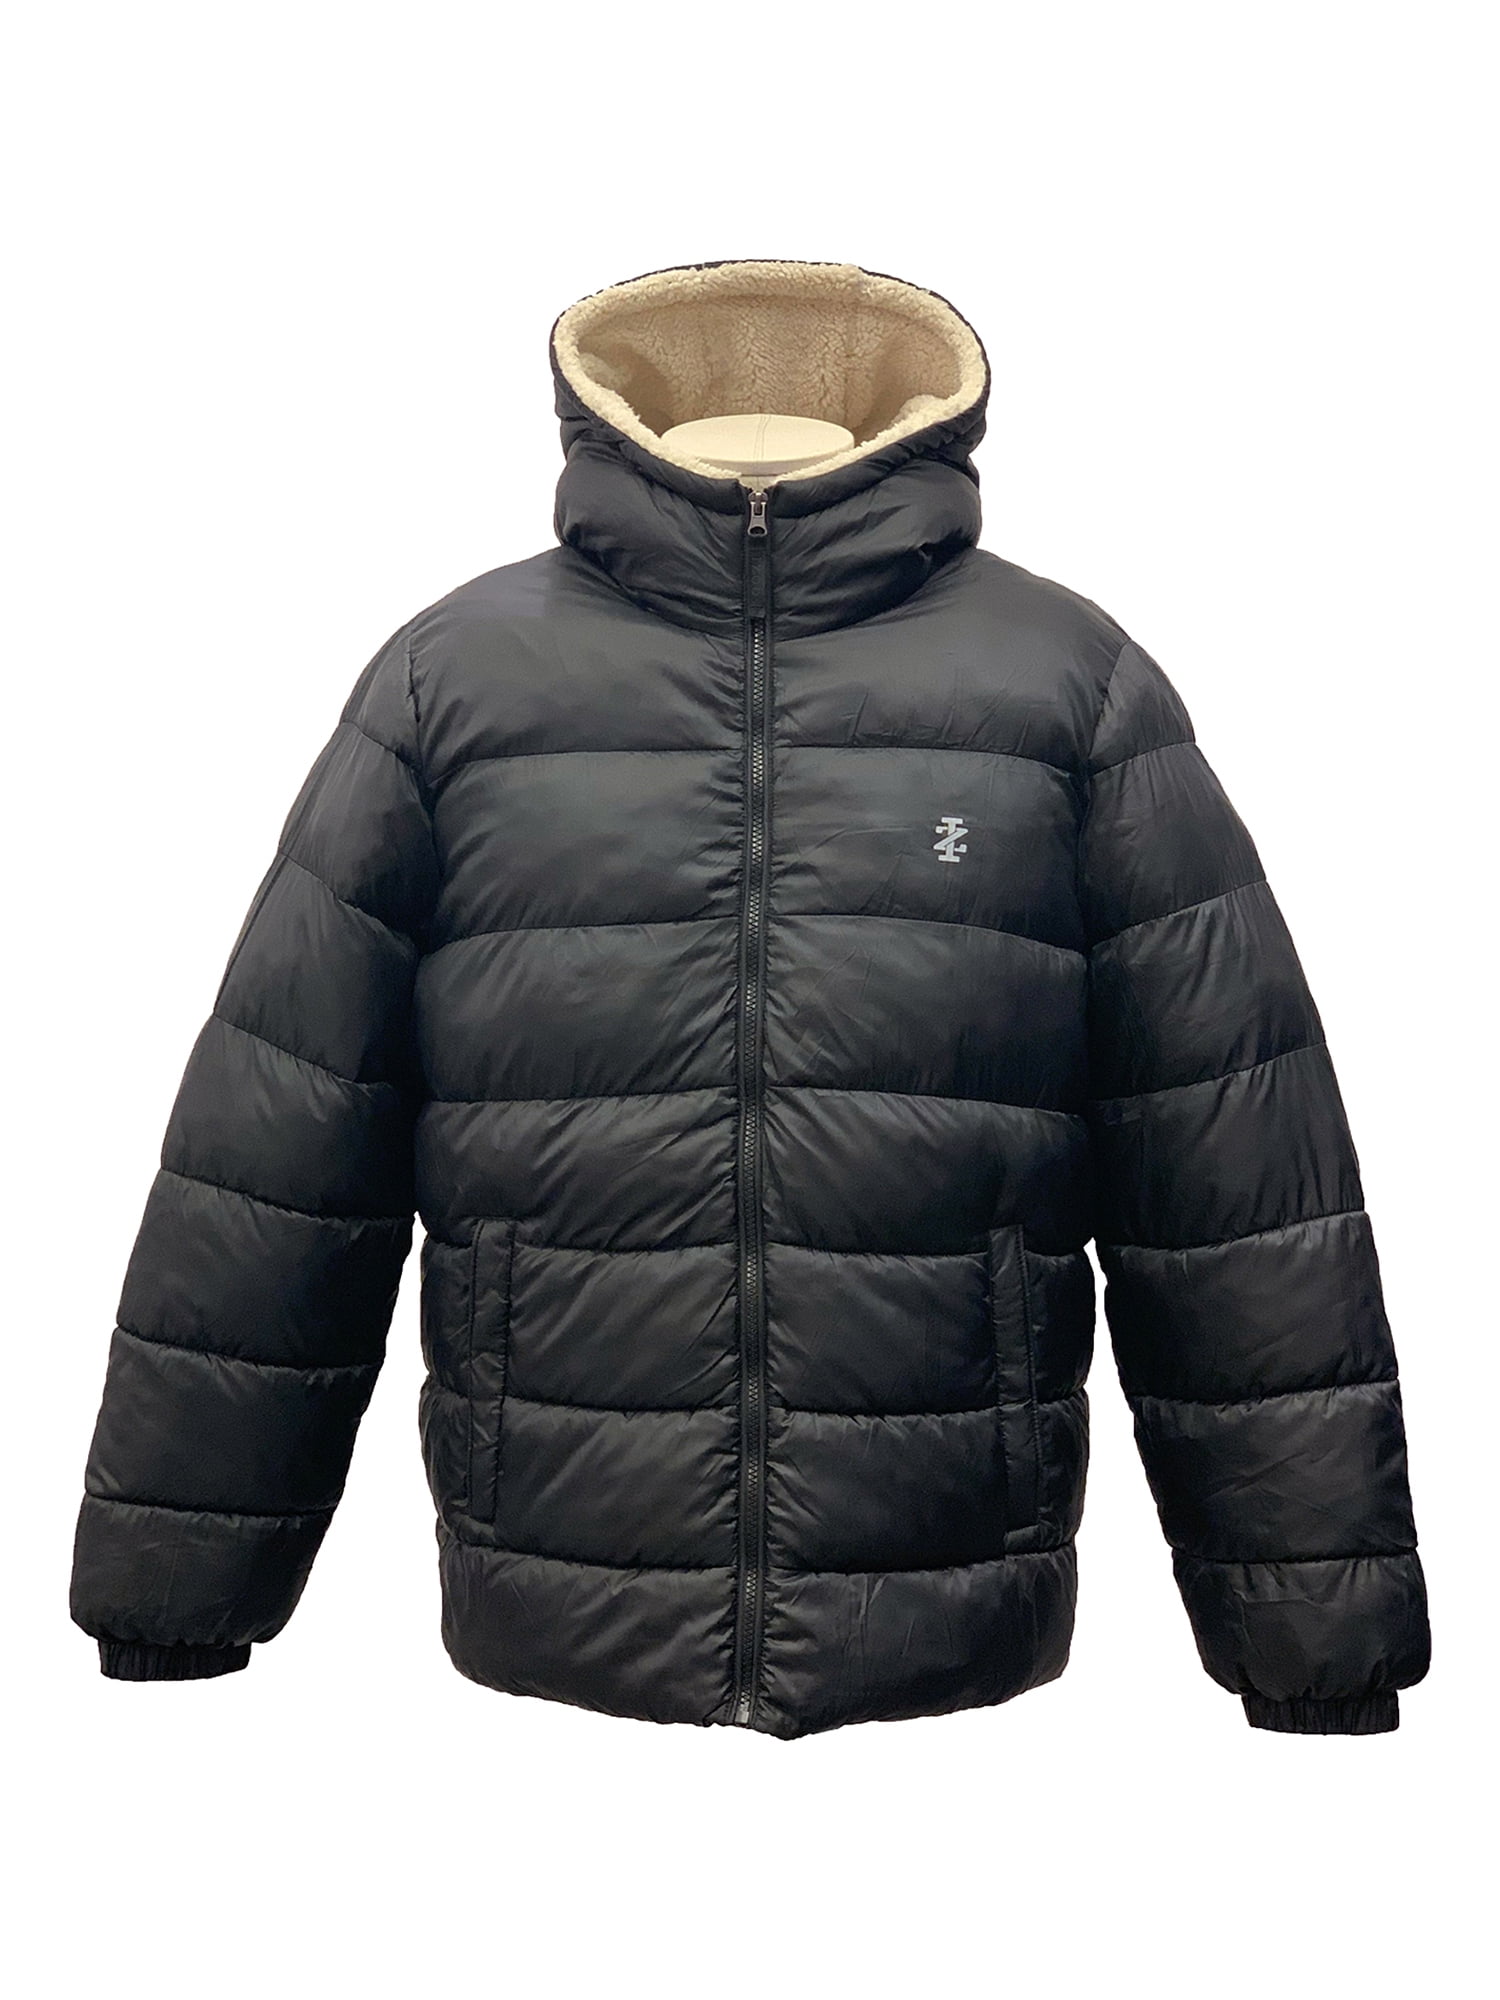 Buy IZOD Mens Sherpa Lined Color Block Puffer Jacket Online at Lowest